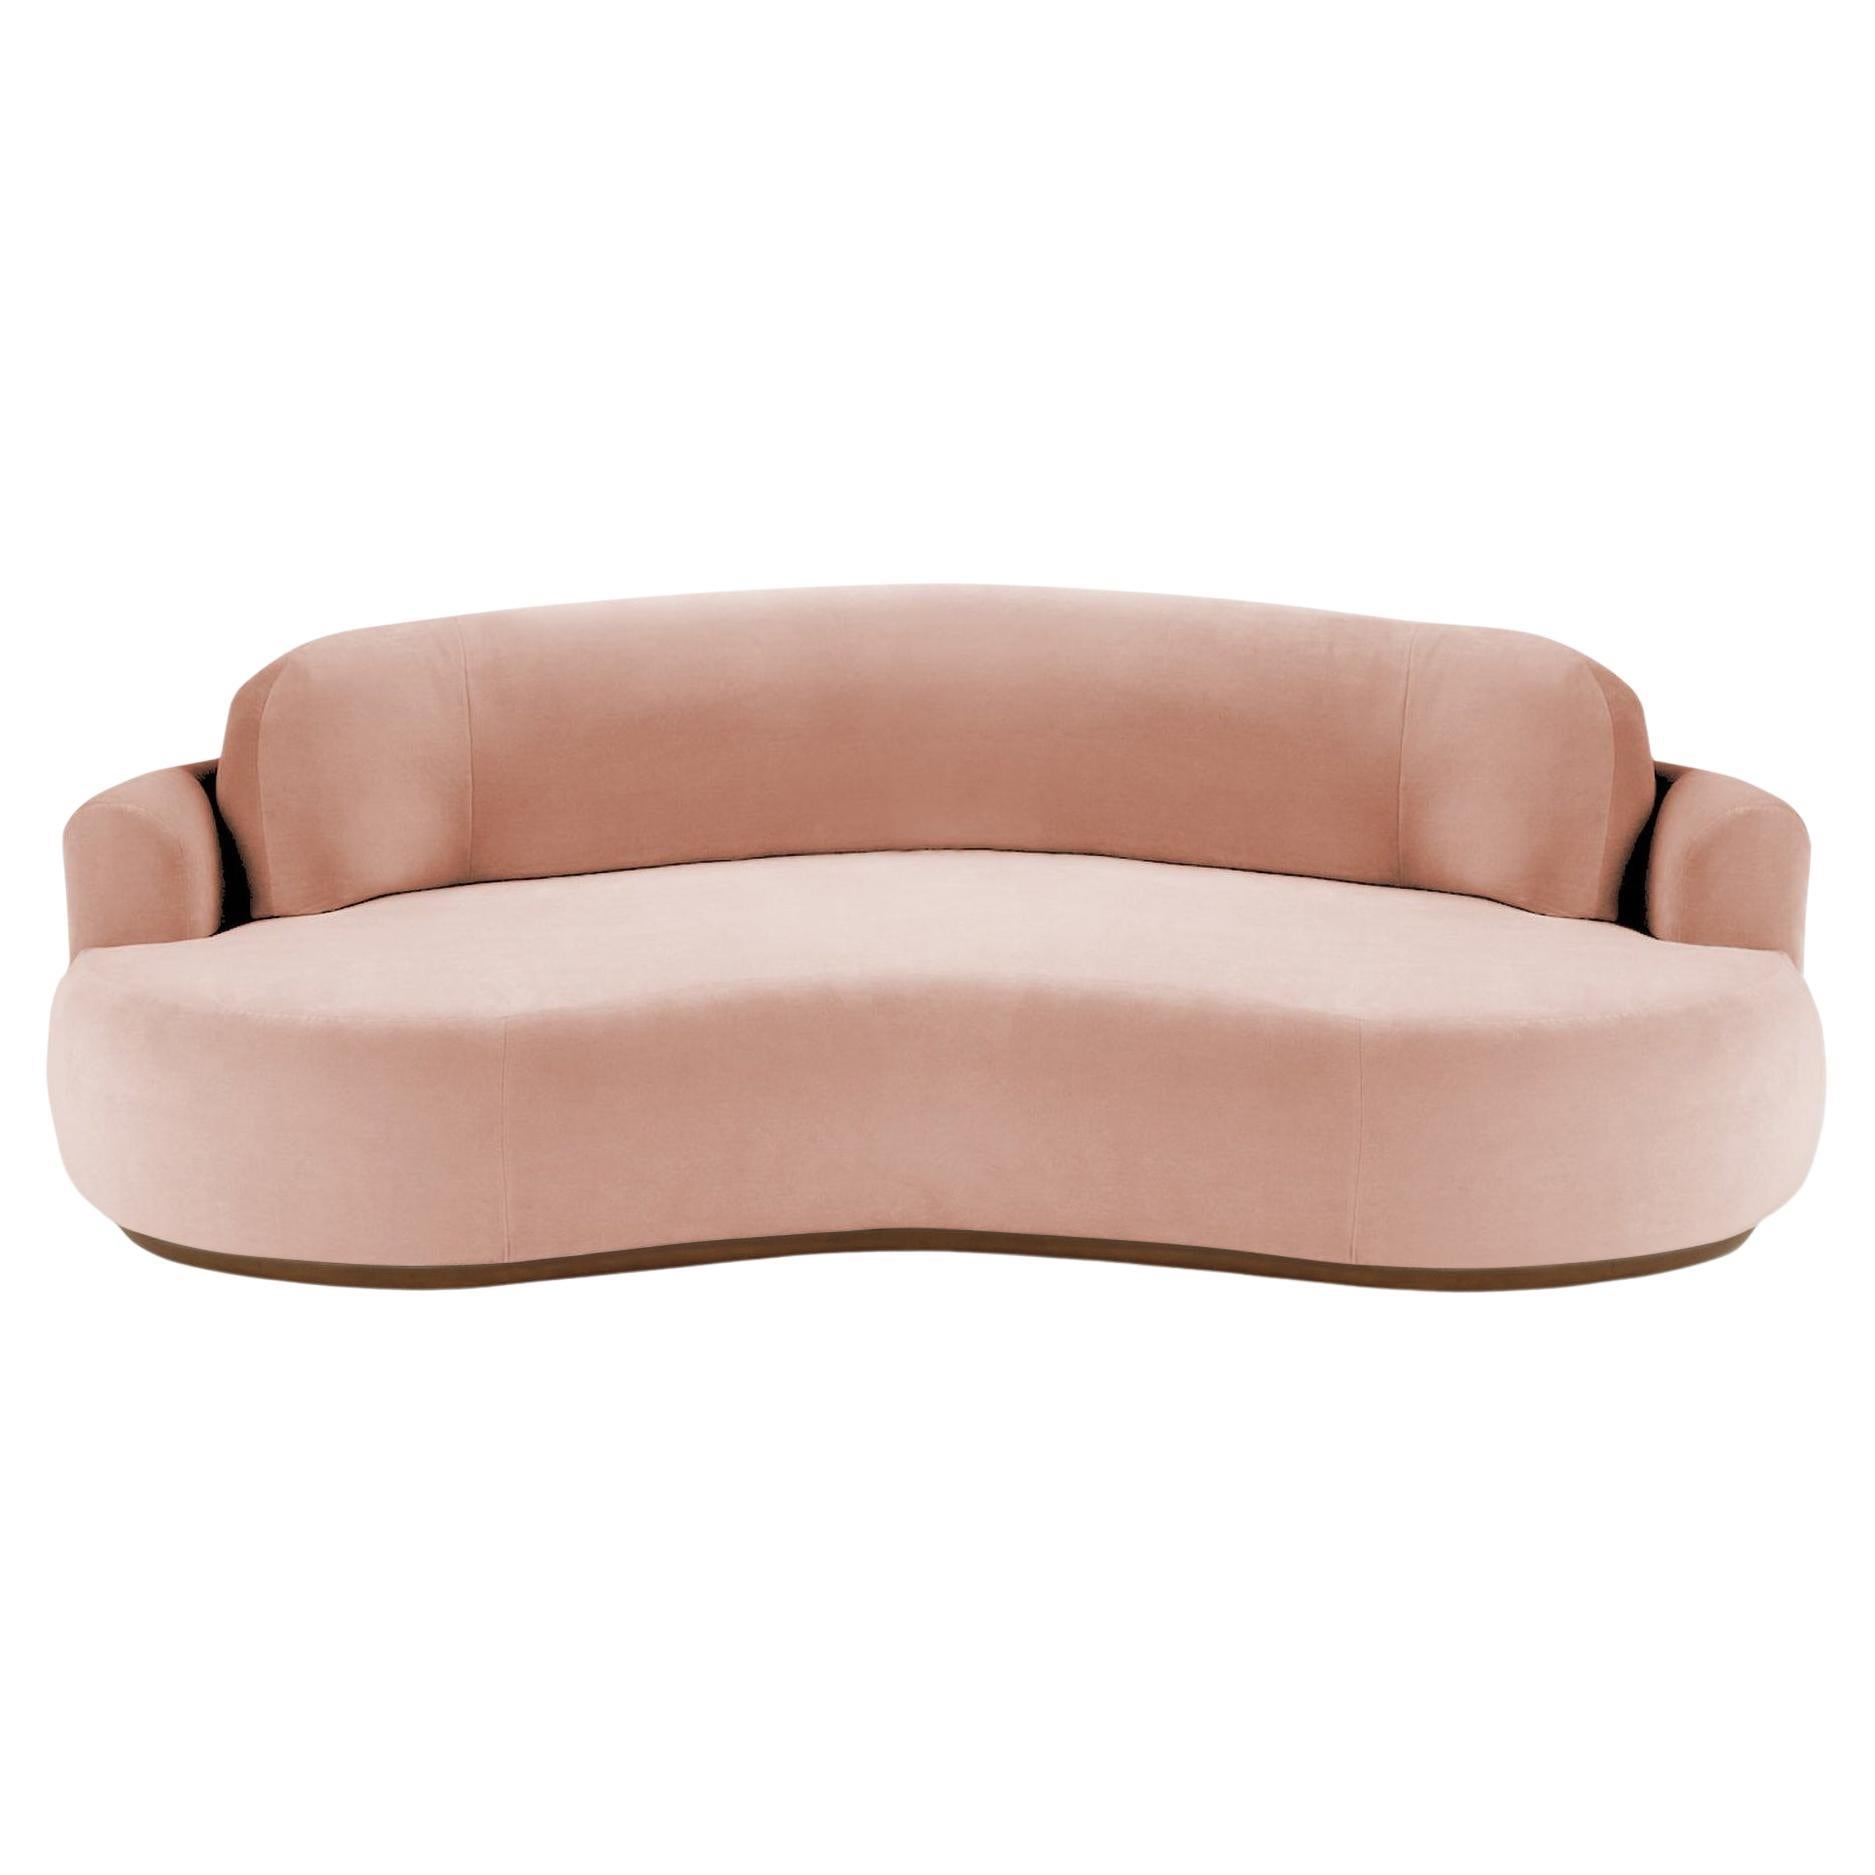 Naked Curved Sofa, Large with Beech Ash-056-1 and Vigo Blossom For Sale